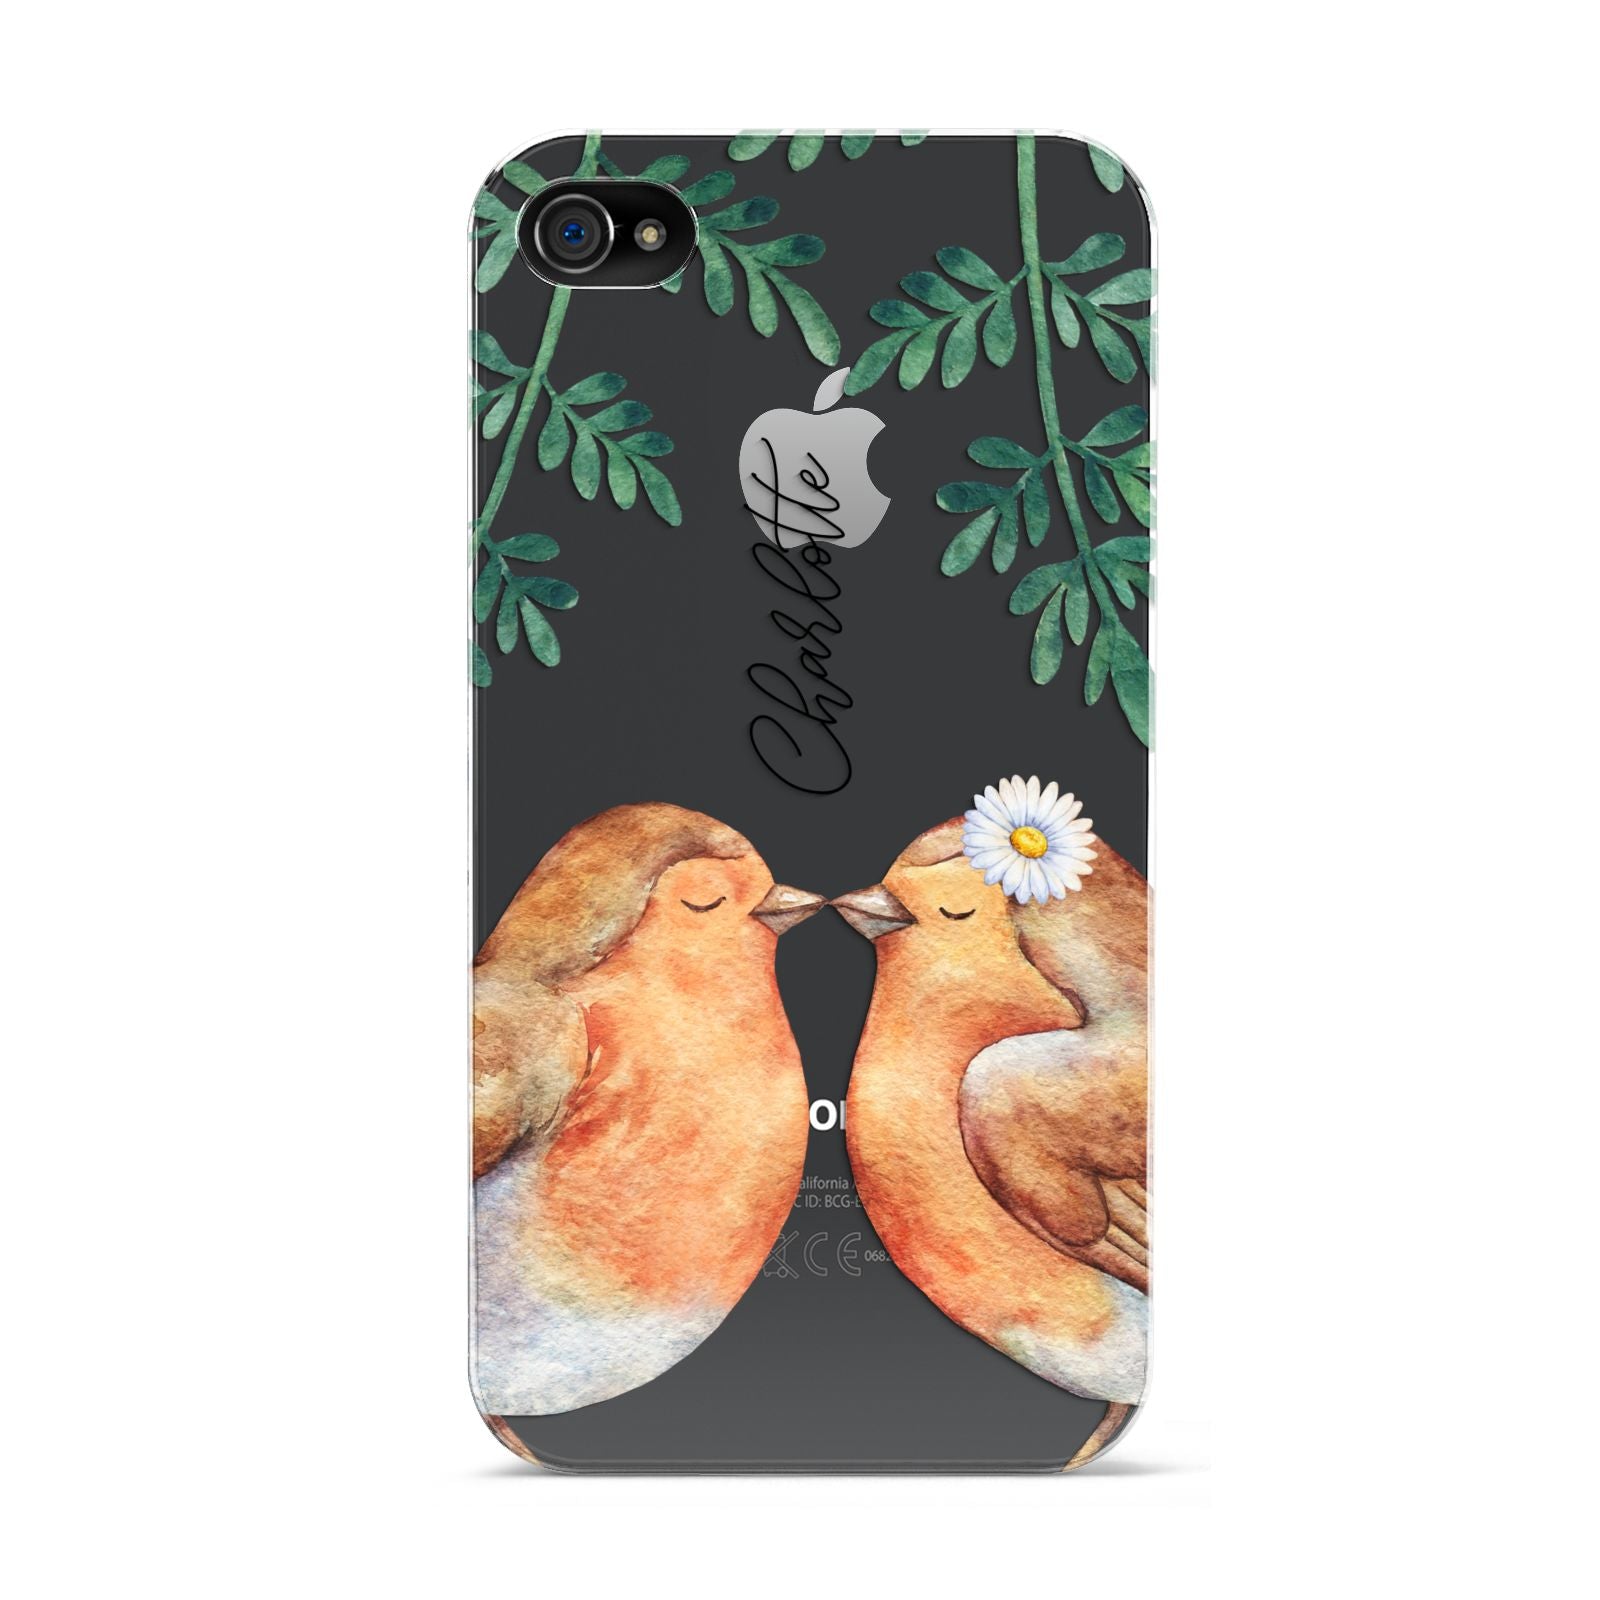 Personalised Pair of Robins Apple iPhone 4s Case